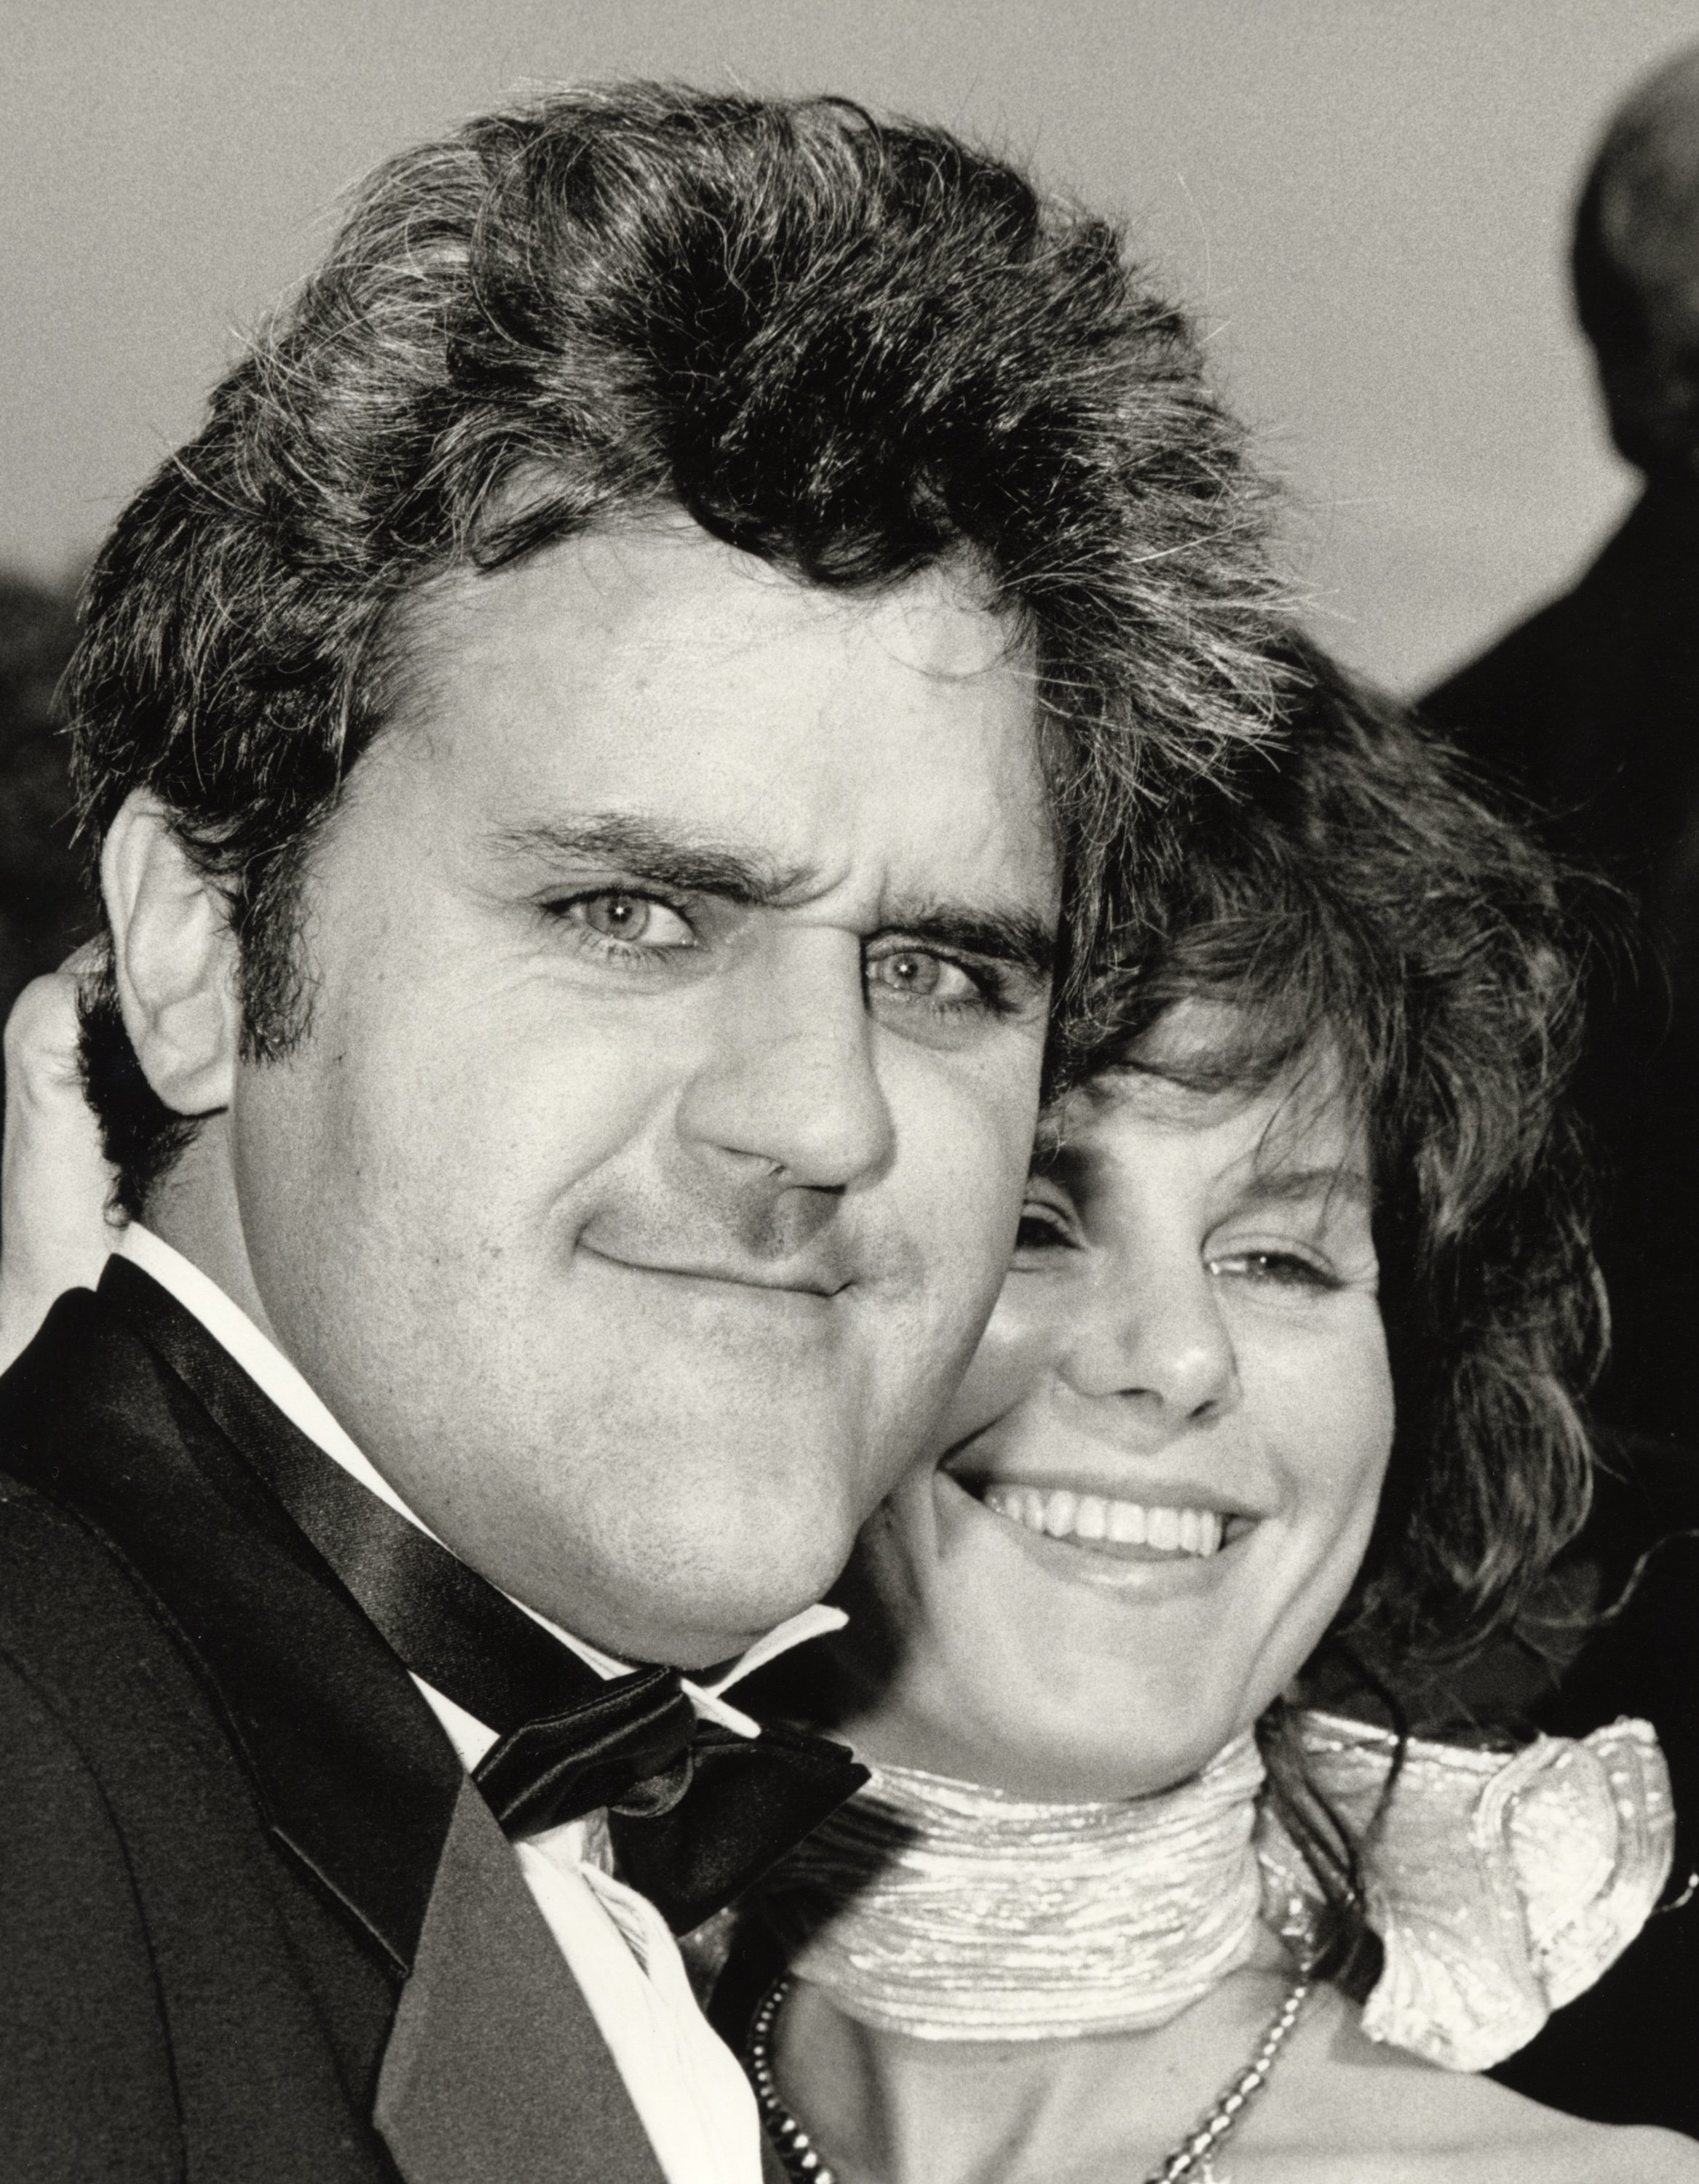 Jay and Mavis Leno at the 38th Annual Primetime Emmy Awards on September 21, 1986. | Source: Ron Galella/Ron Galella Collection/Getty Images